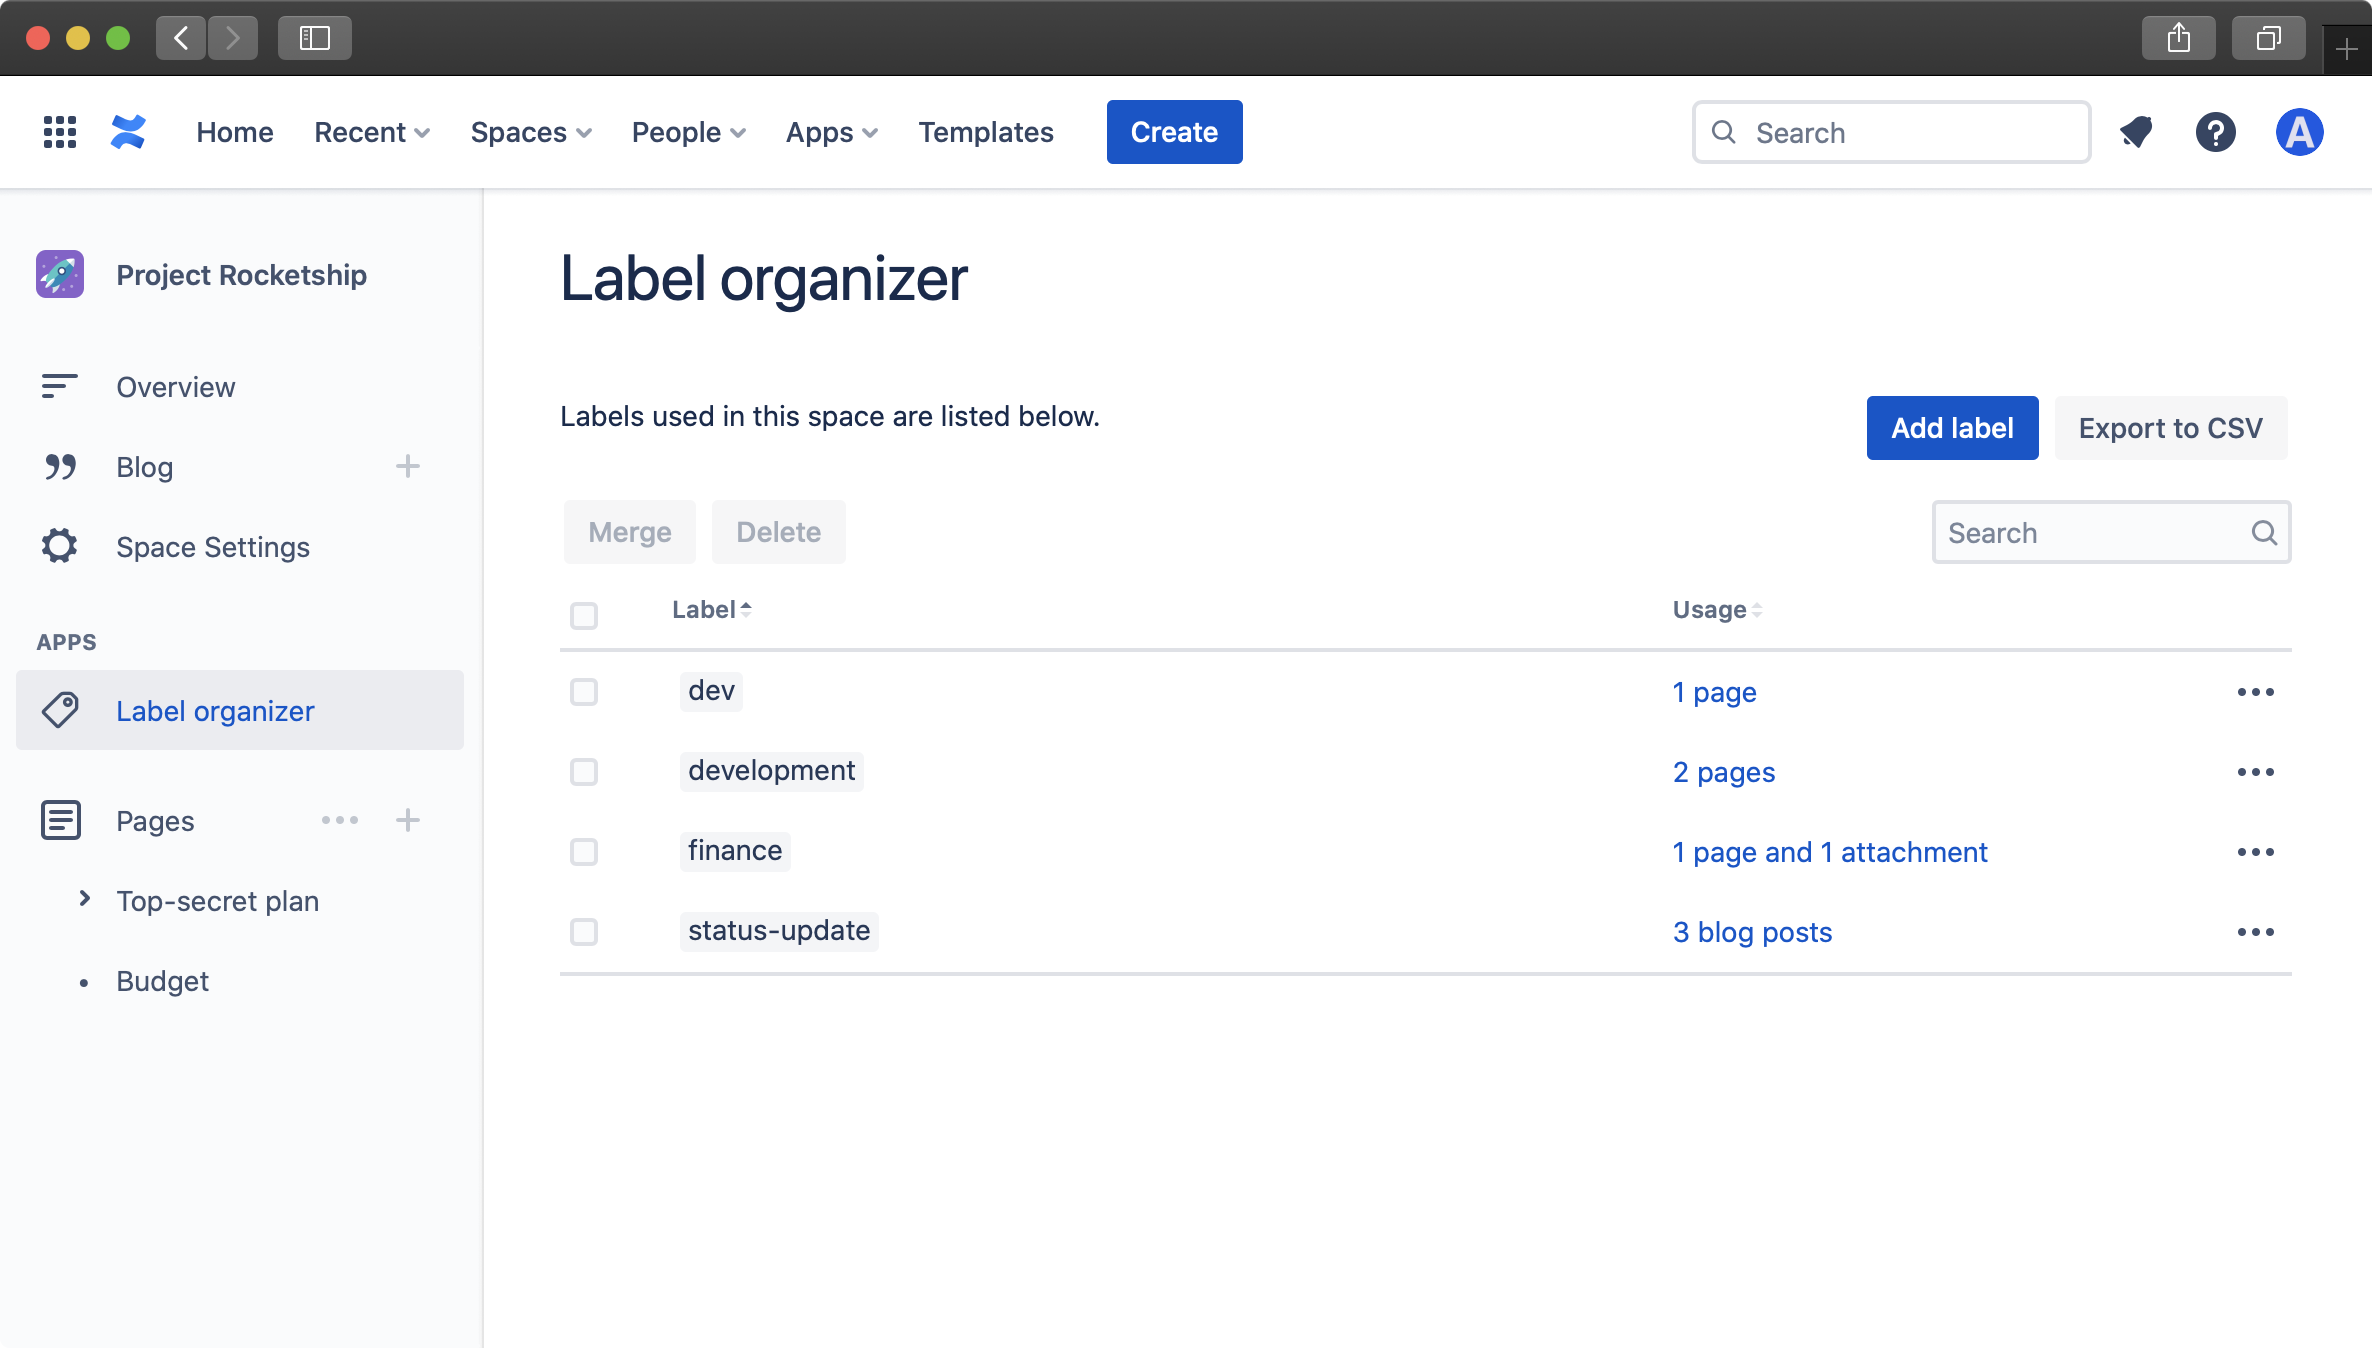 View all labels in a space